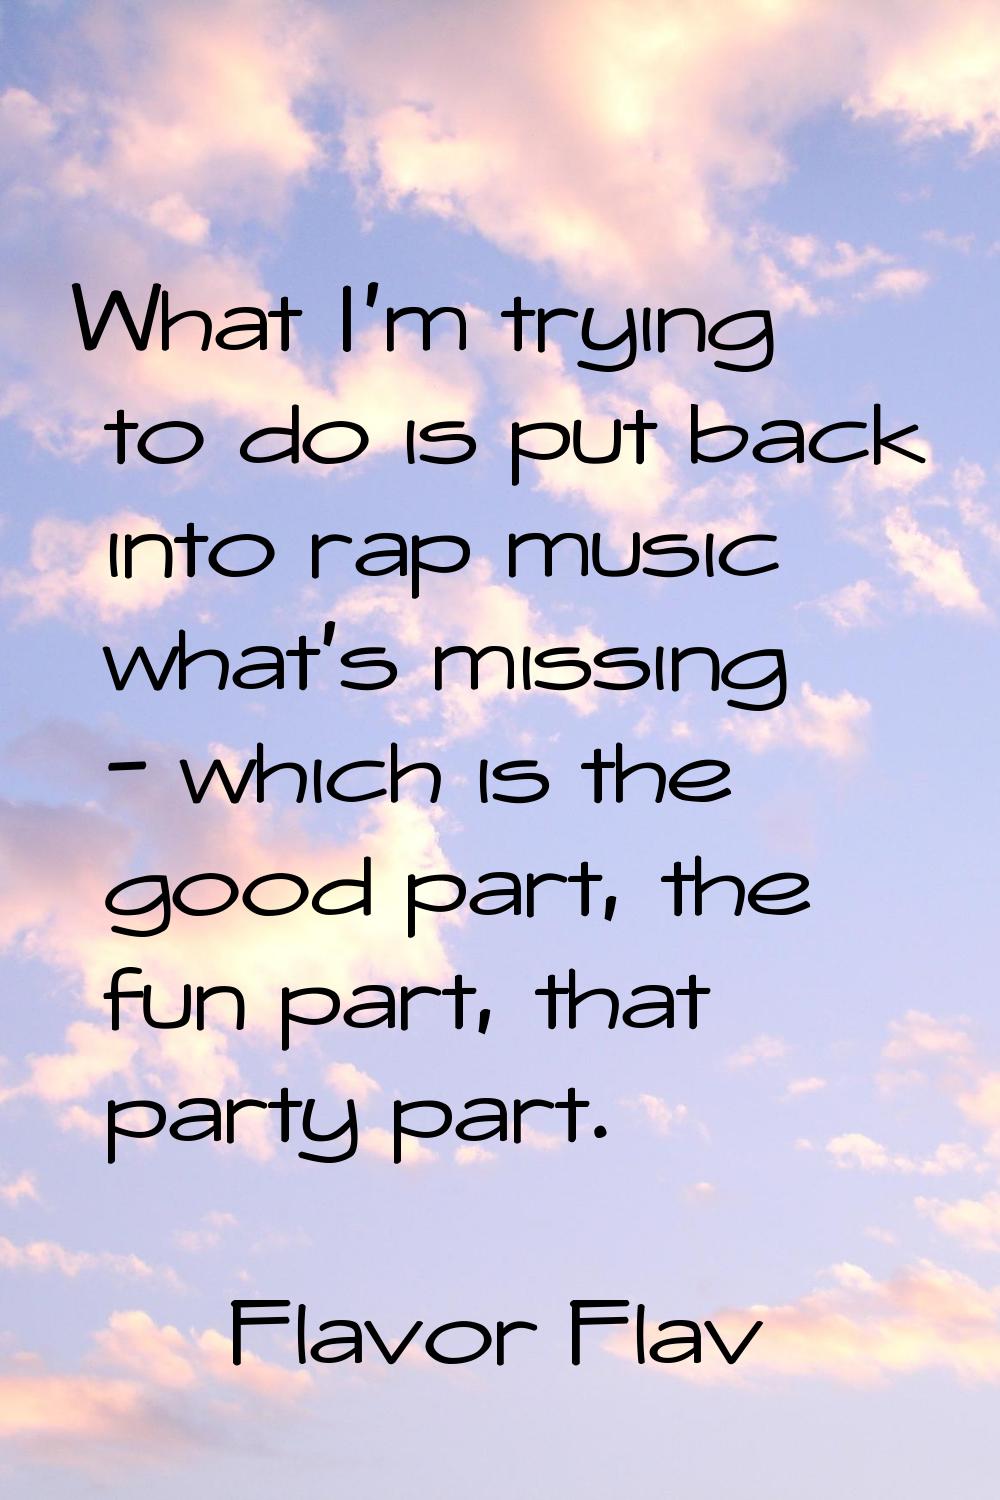 What I'm trying to do is put back into rap music what's missing - which is the good part, the fun p